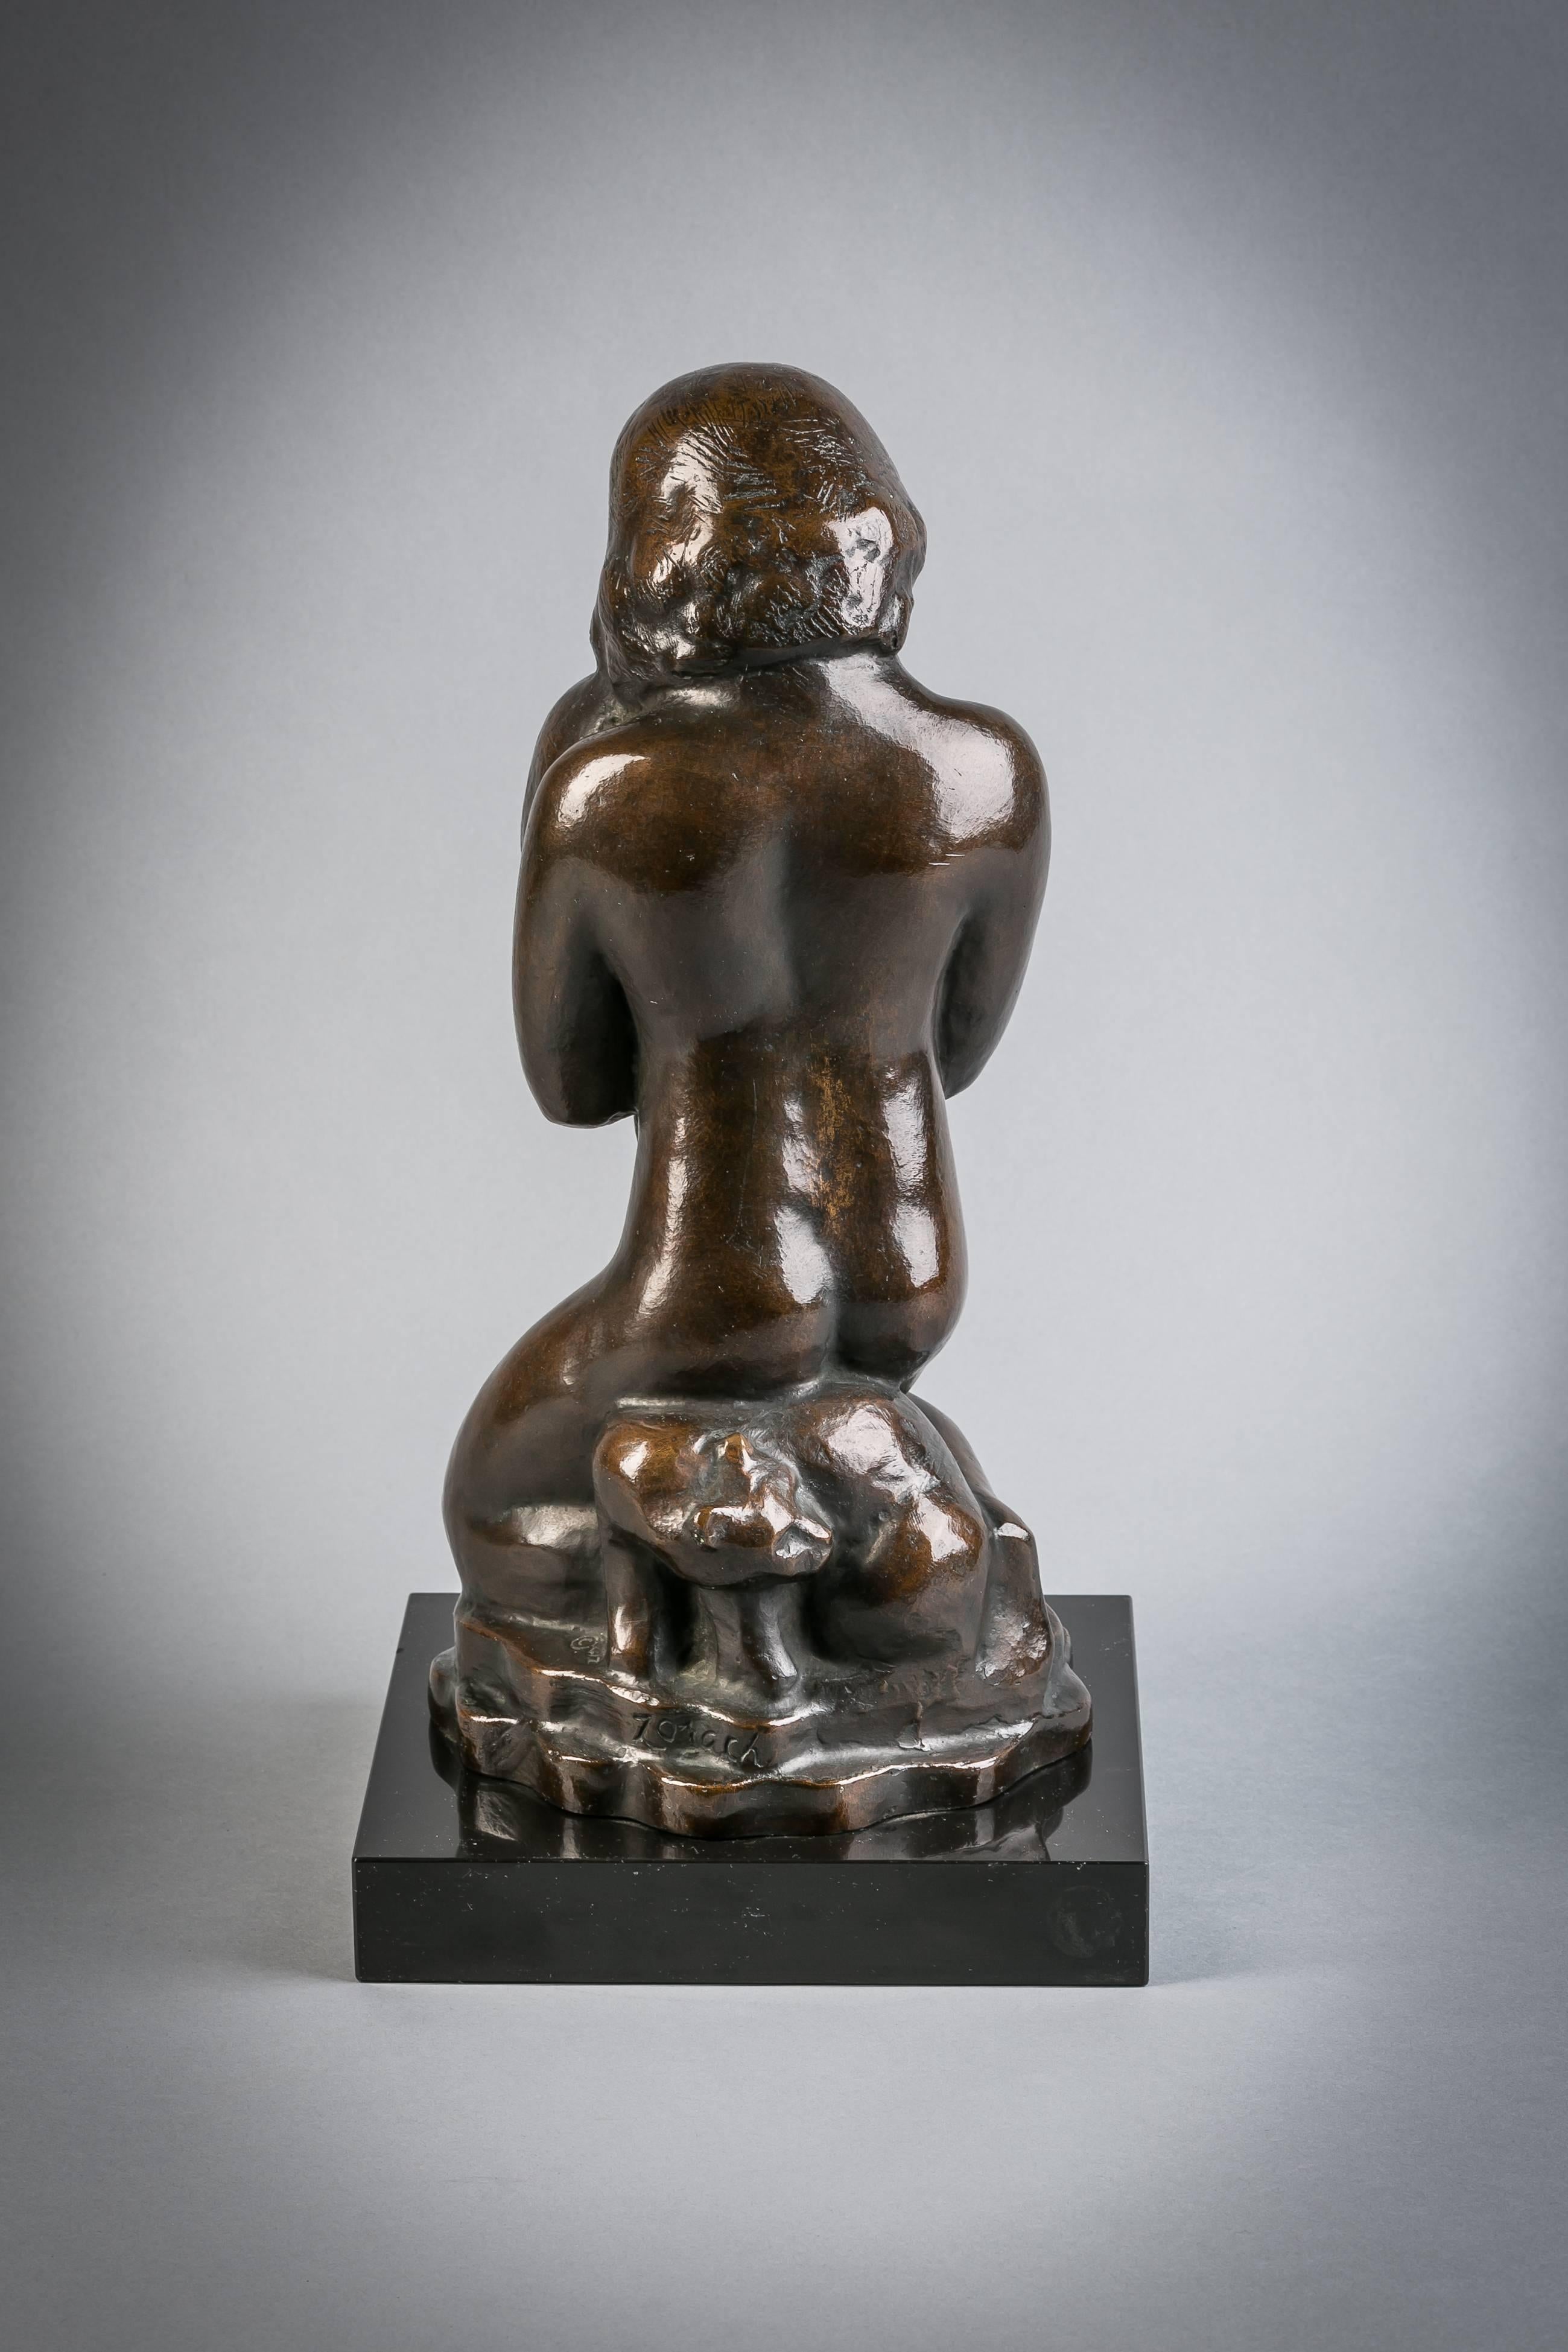 American bronze girl with cats, signed William Zorach with copyright WZ mark, circa 1920.